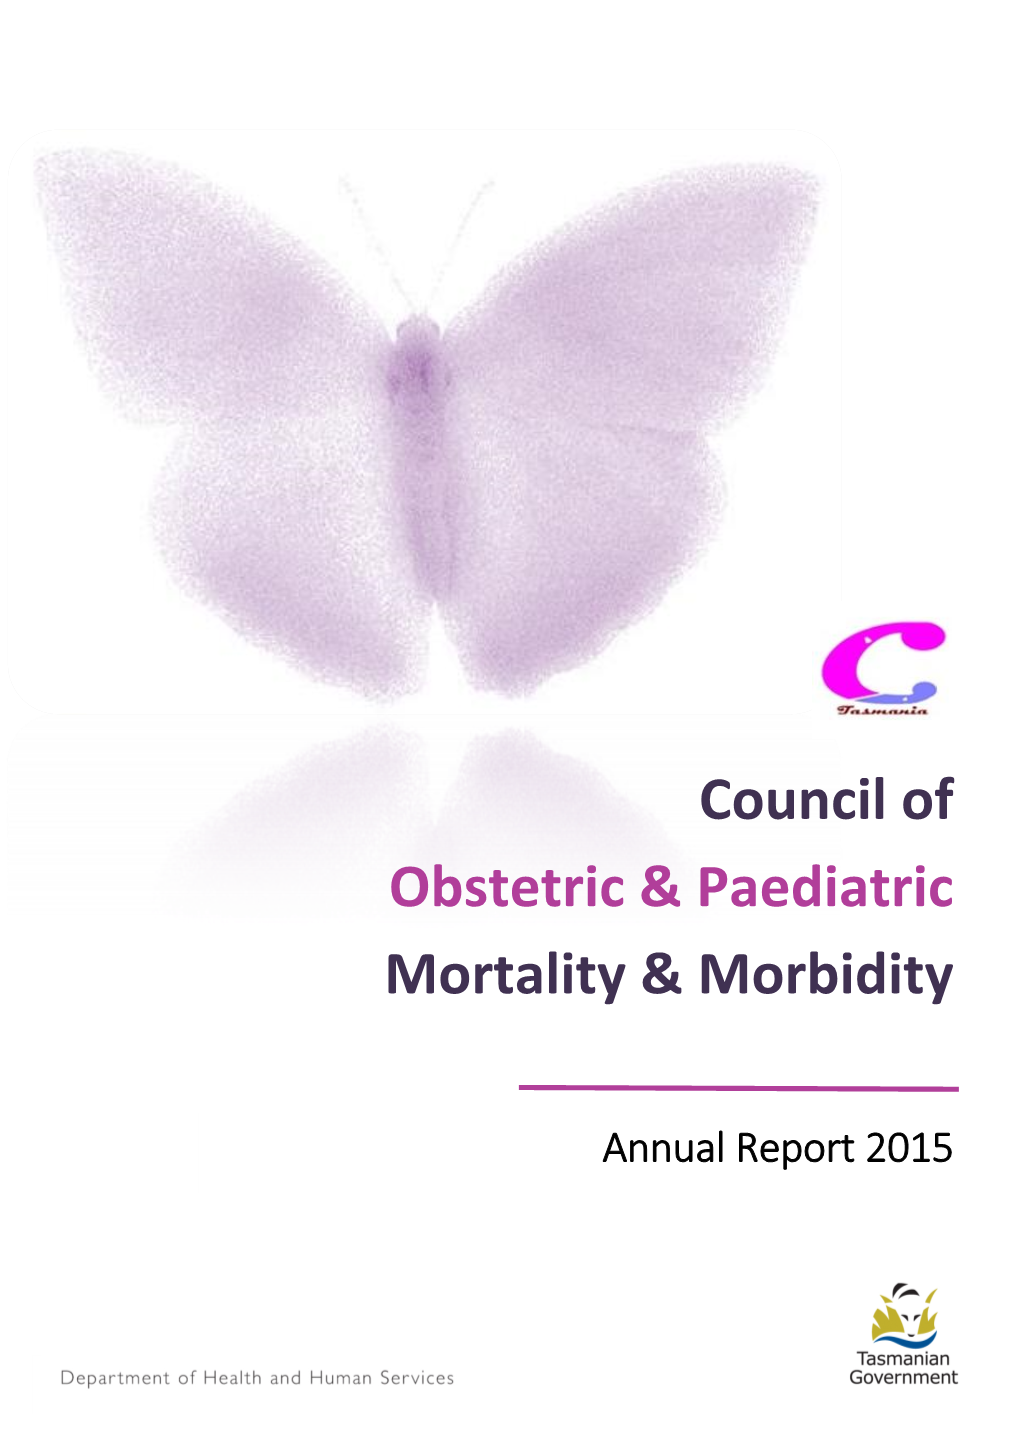 Council of Obstetric & Paediatric Mortality & Morbidity